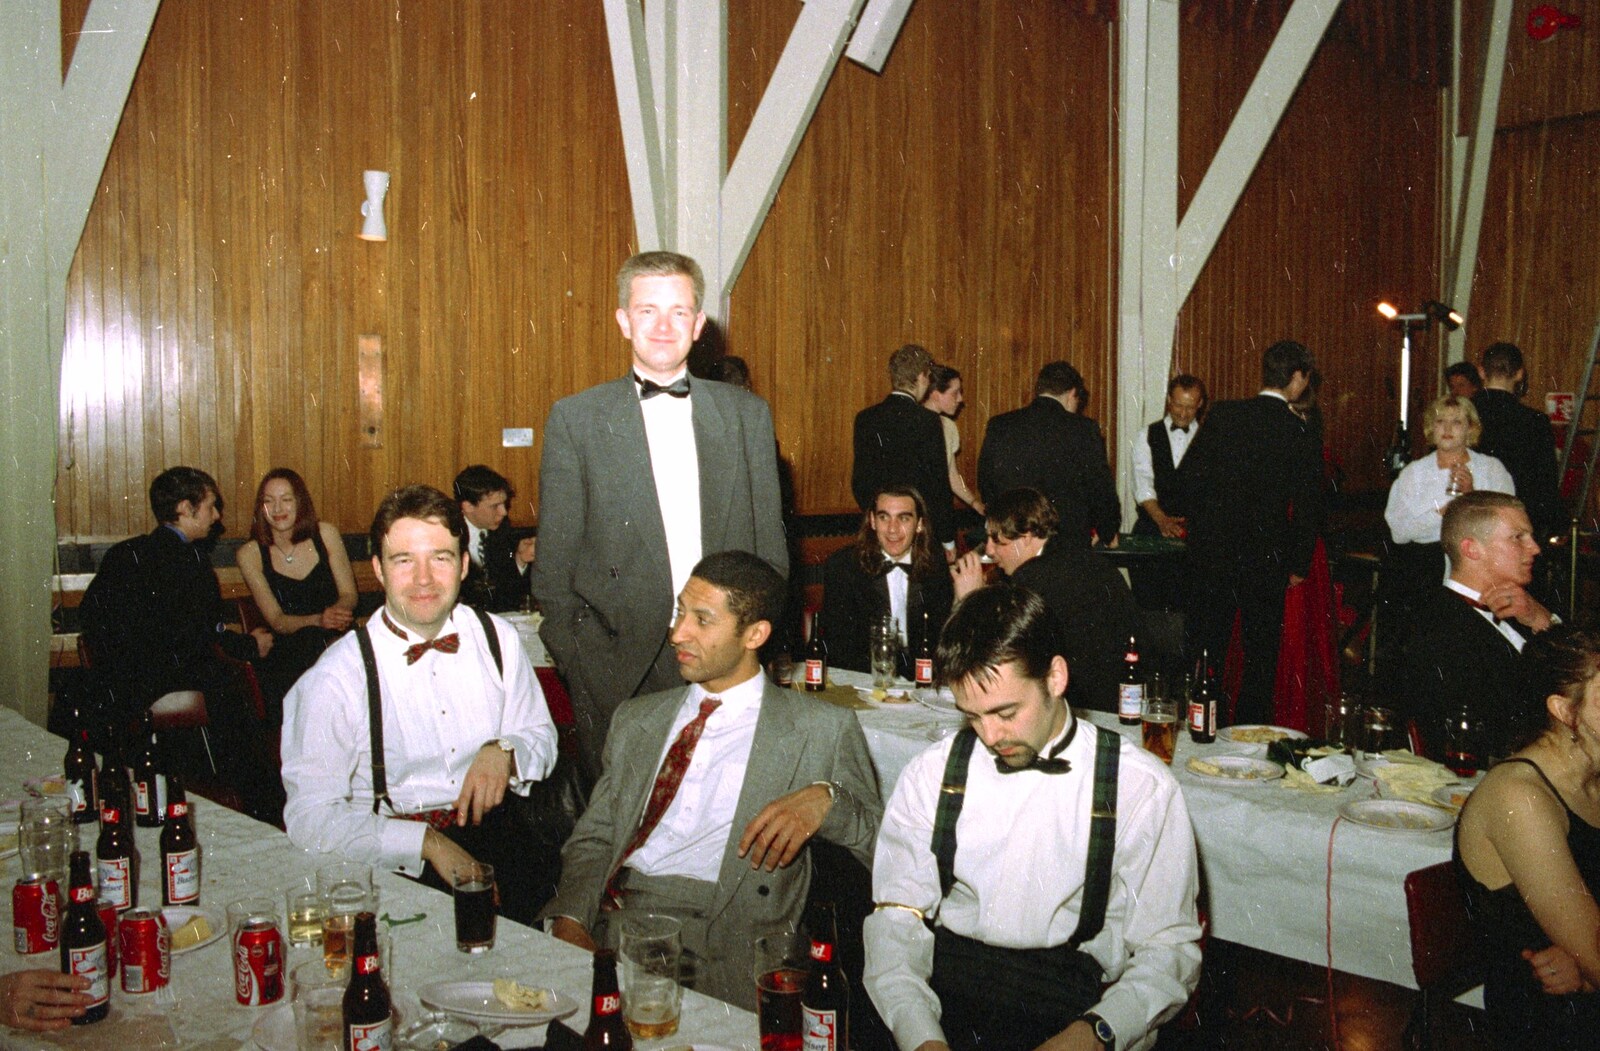 Nosher and the boys from CISU at the Suffolk College May Ball, Ipswich, Suffolk - 11th May 1997